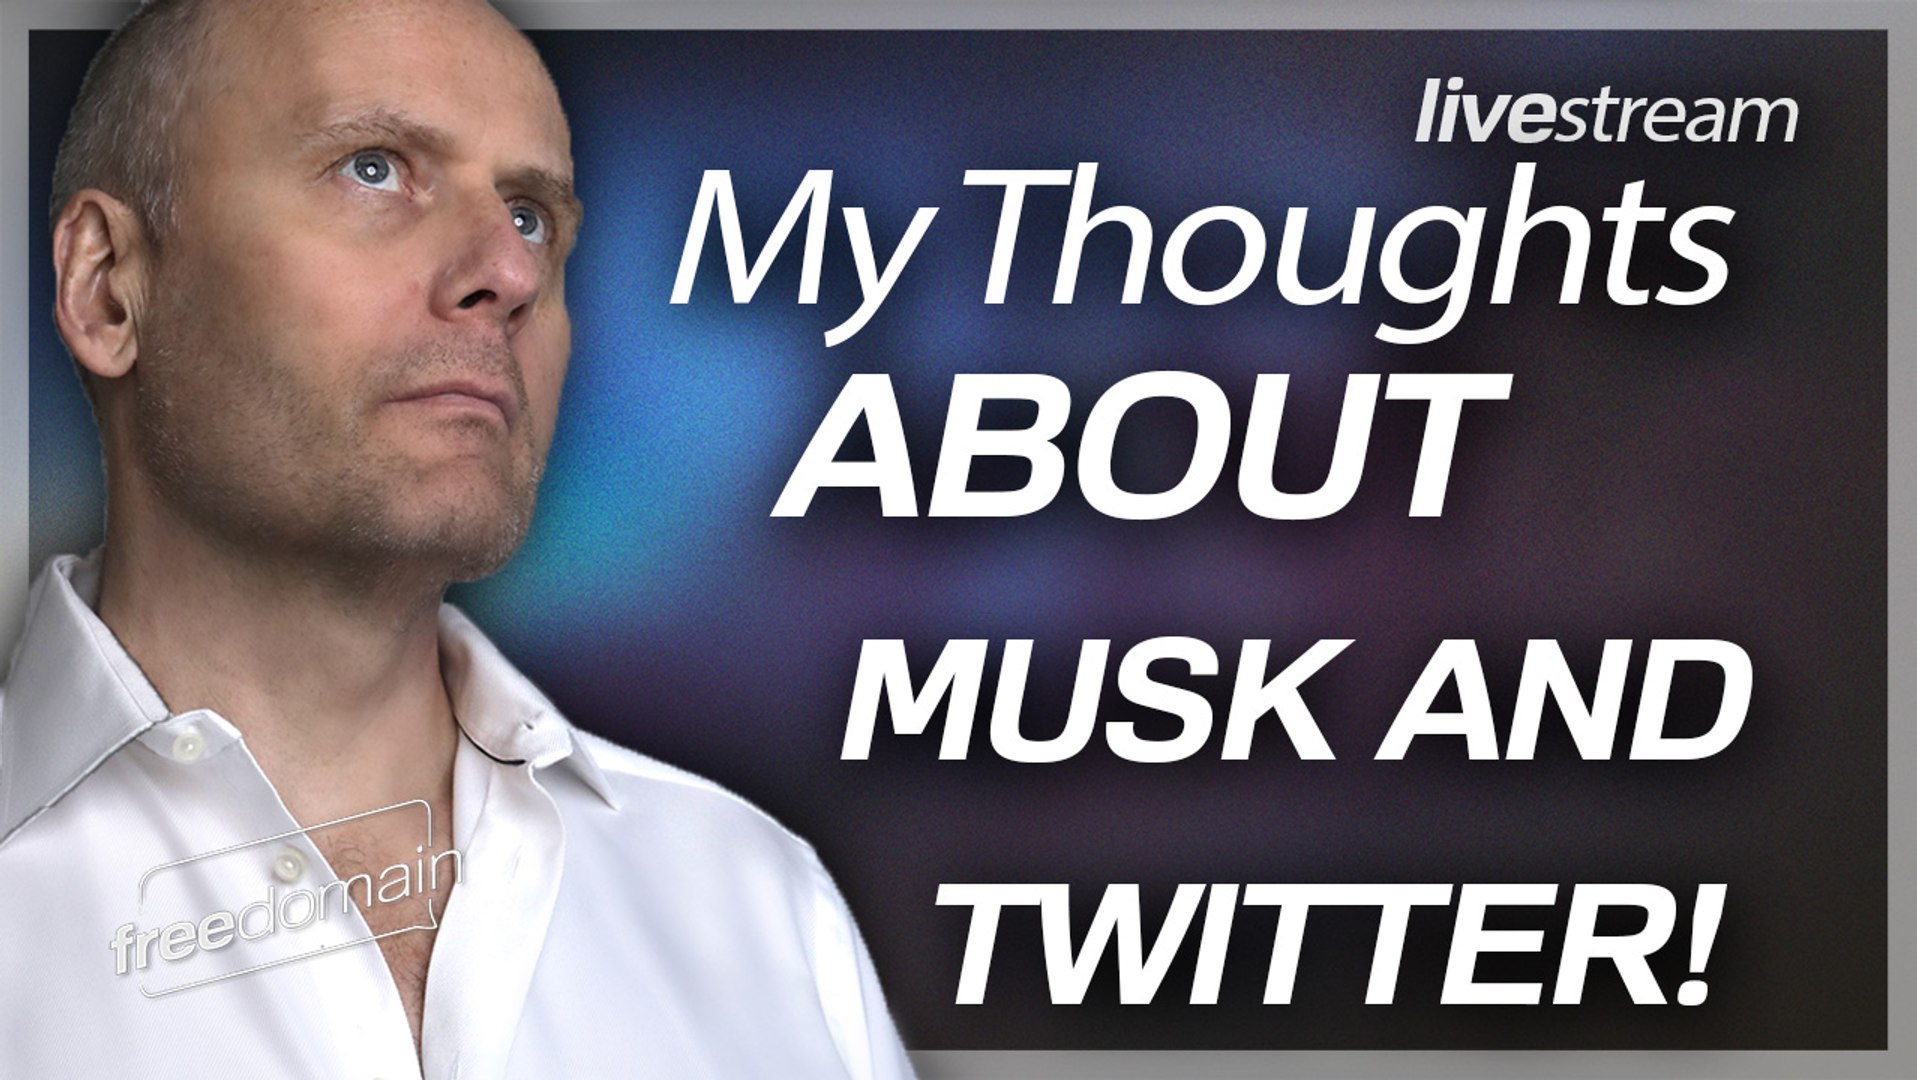 MY THOUGHTS ABOUT ELON MUSK AND TWITTER!